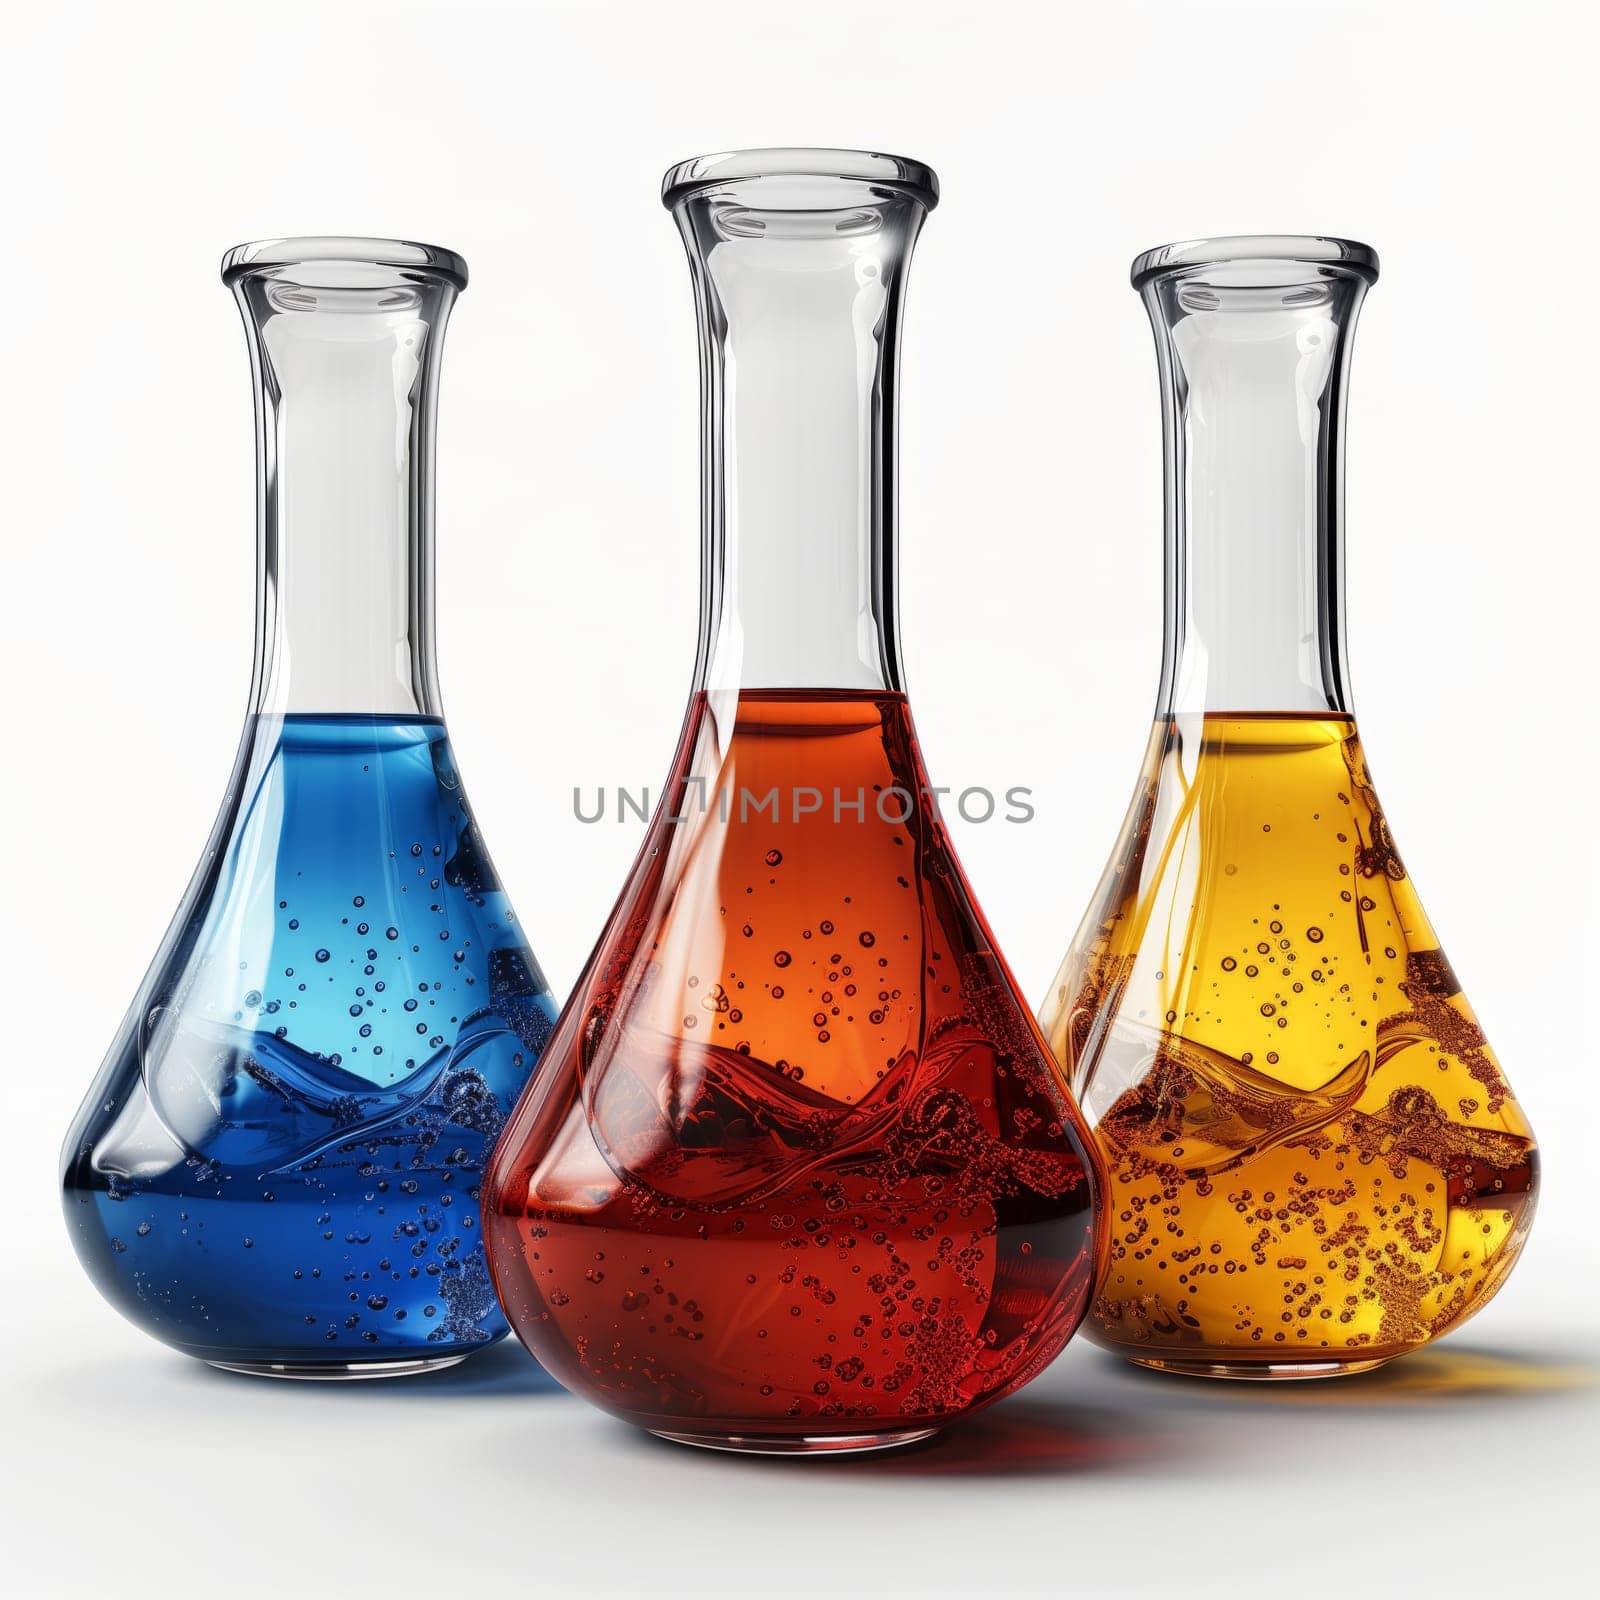 Three beakers with various colored liquids on a white surface by richwolf